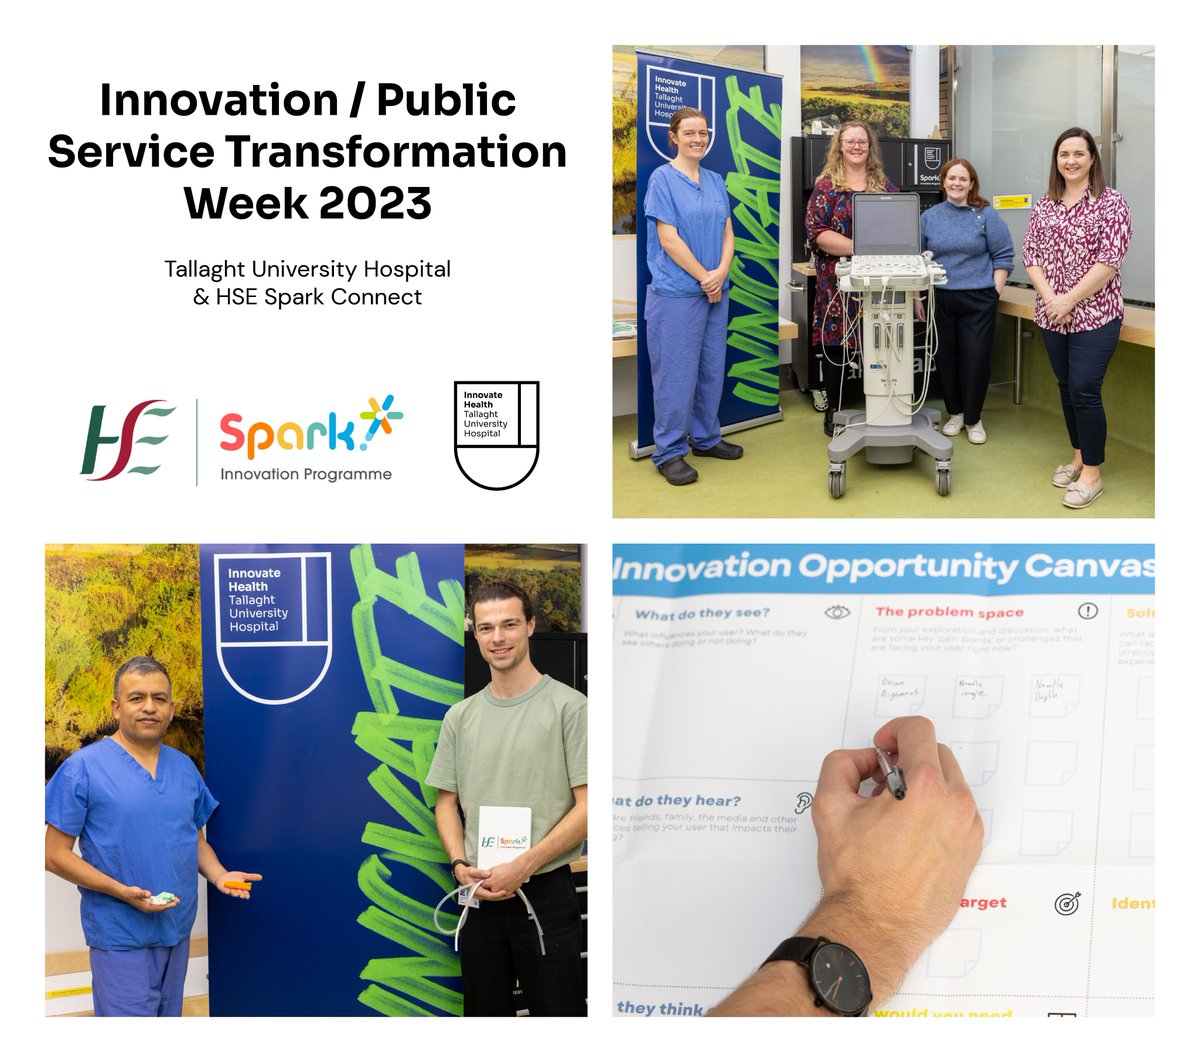 Lots going on in TUH in the past few days to support Innovation Week.

Our Innovation wing - @InnovateTUH -met with staff to discuss new projects.

The team also held an online event as part of #SparkConnect to support Health Care Workers around innovation in their hospitals.